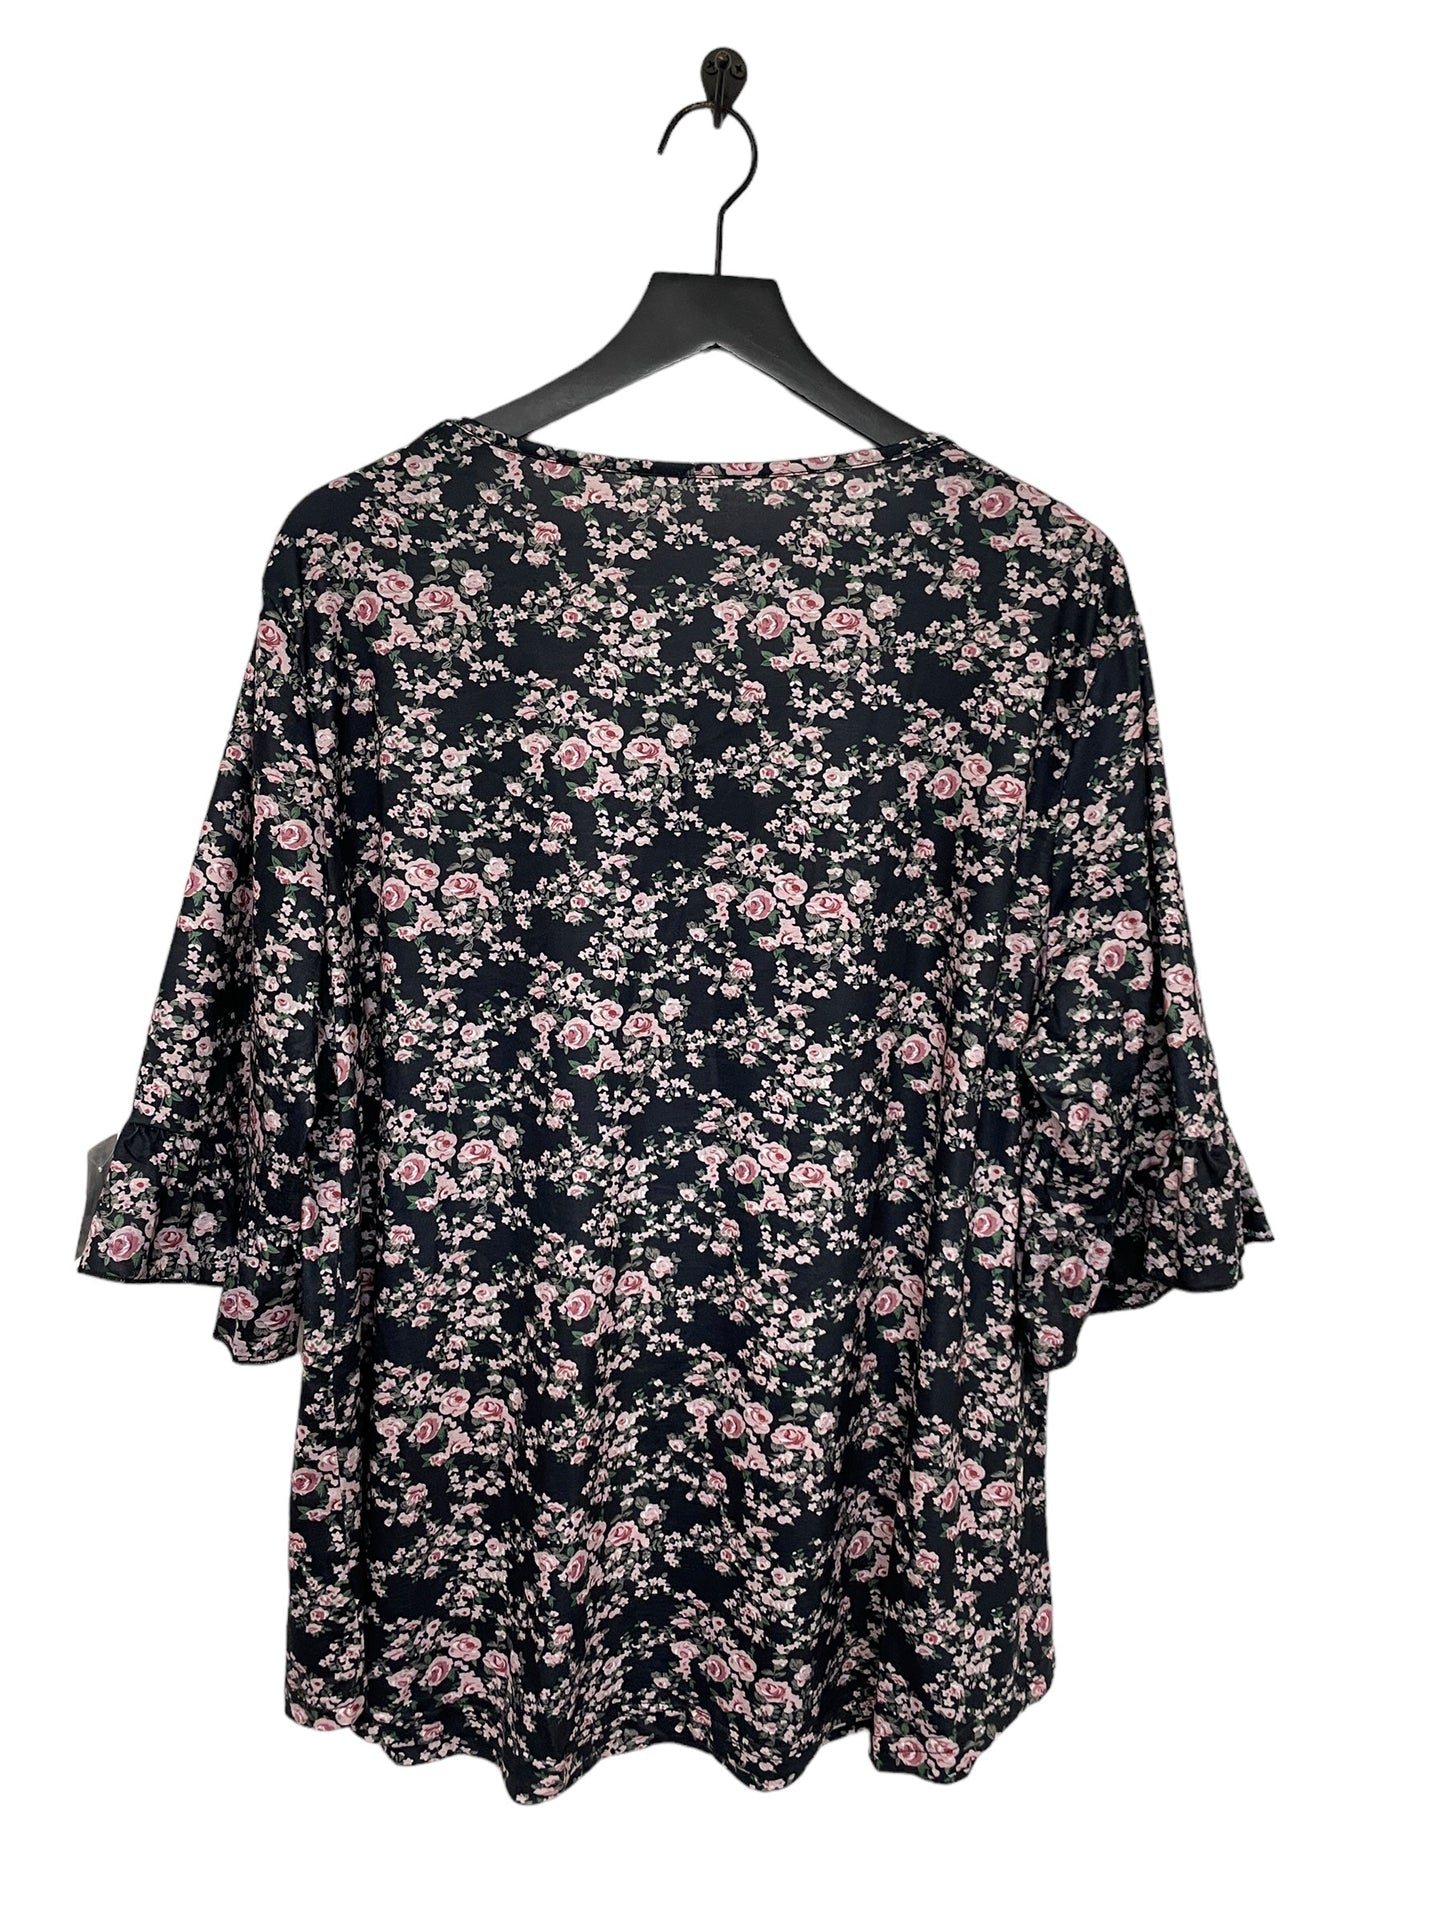 Floral Print Top Short Sleeve Cme, Size 3x